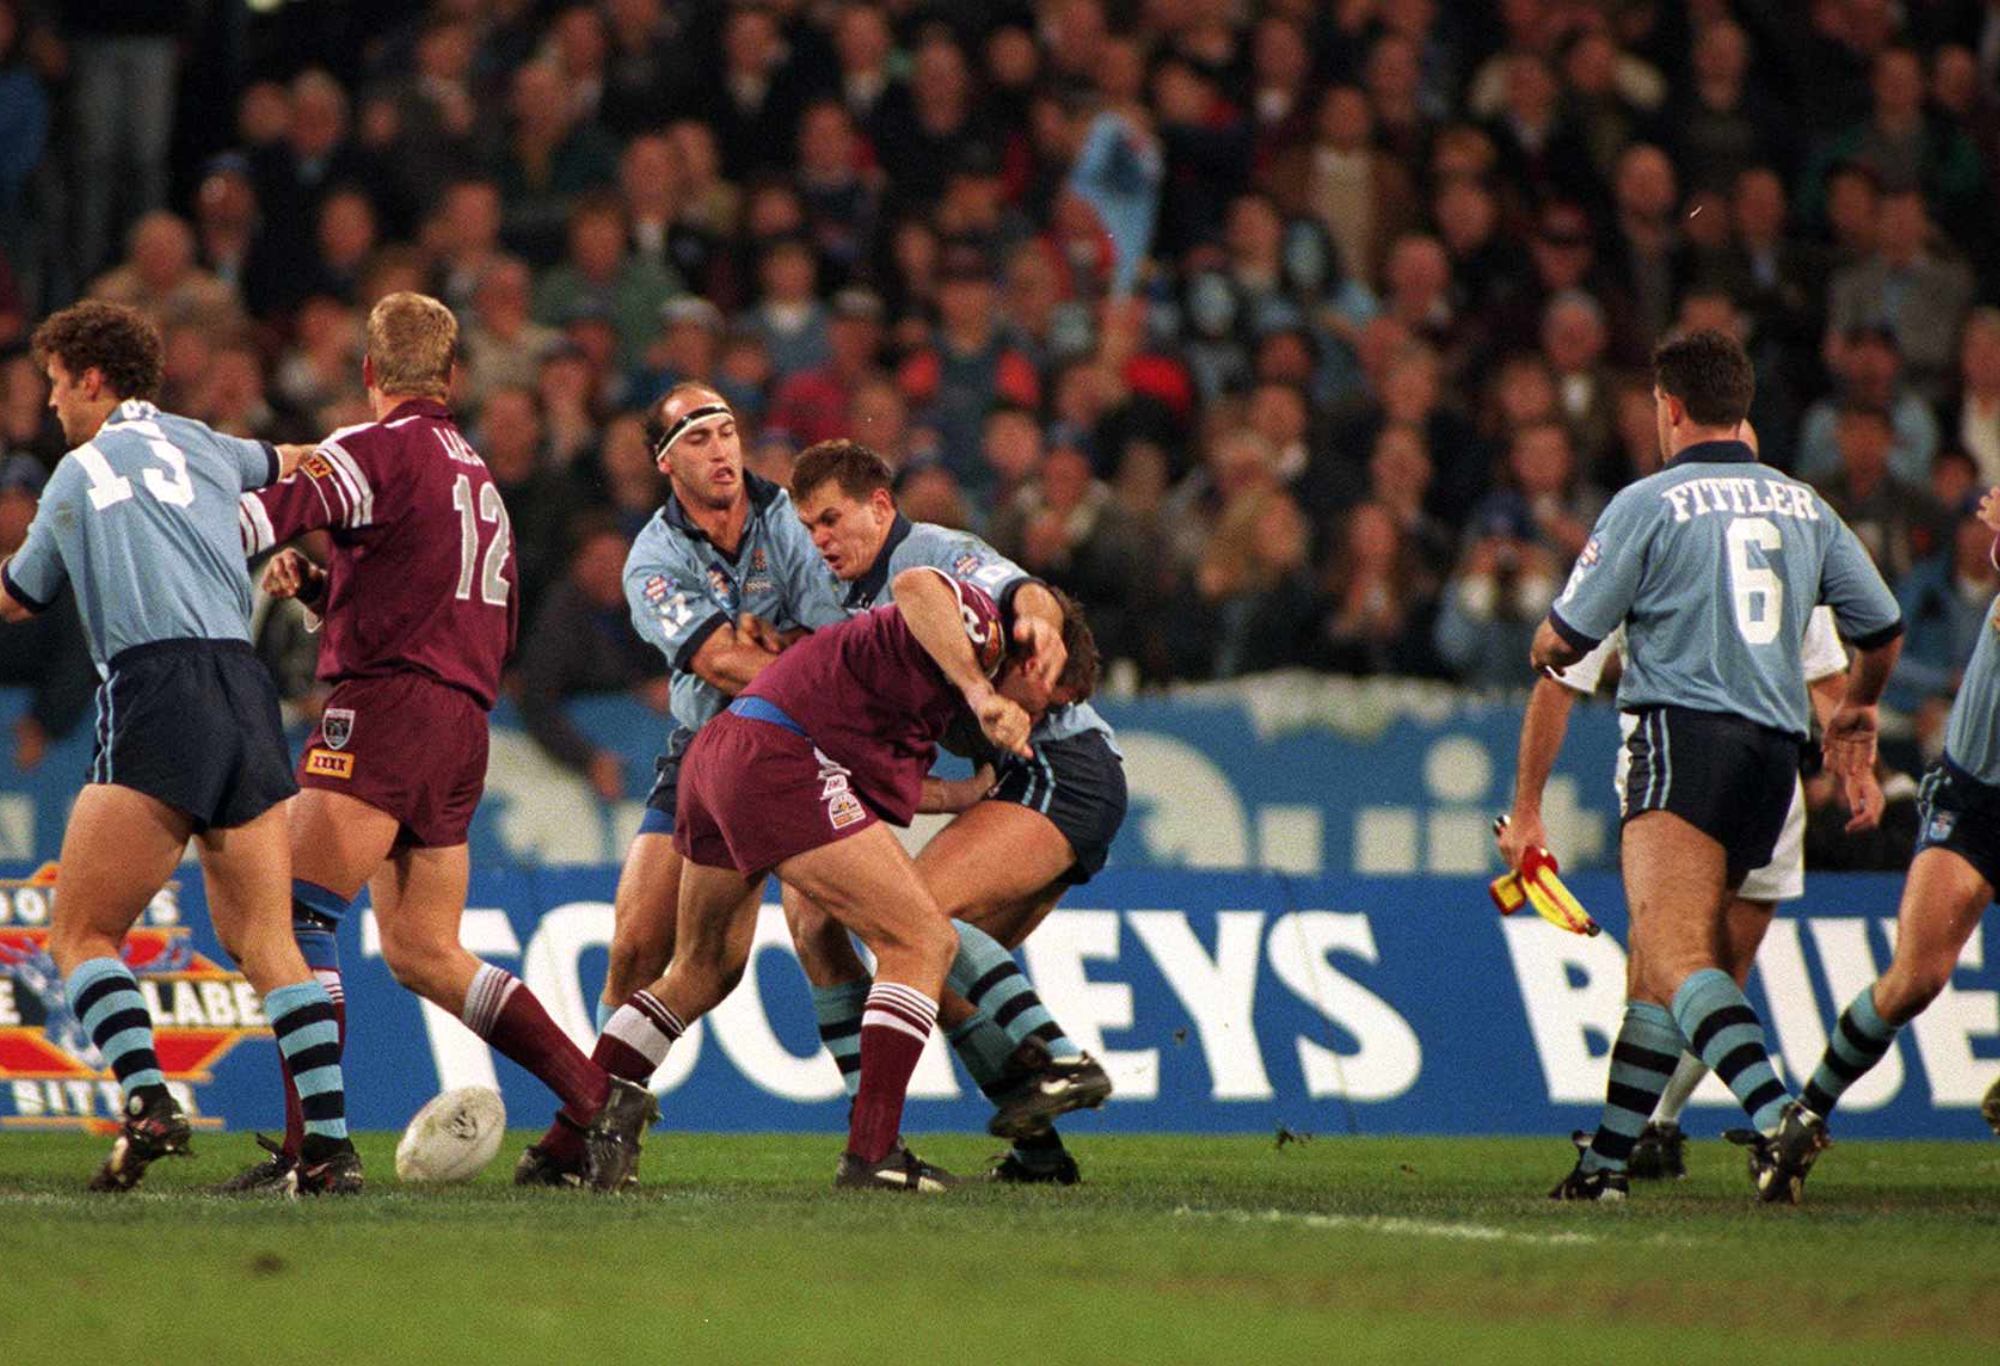 Tempers flare during the 1995 State of Origin contest. (Photo: Getty Images)